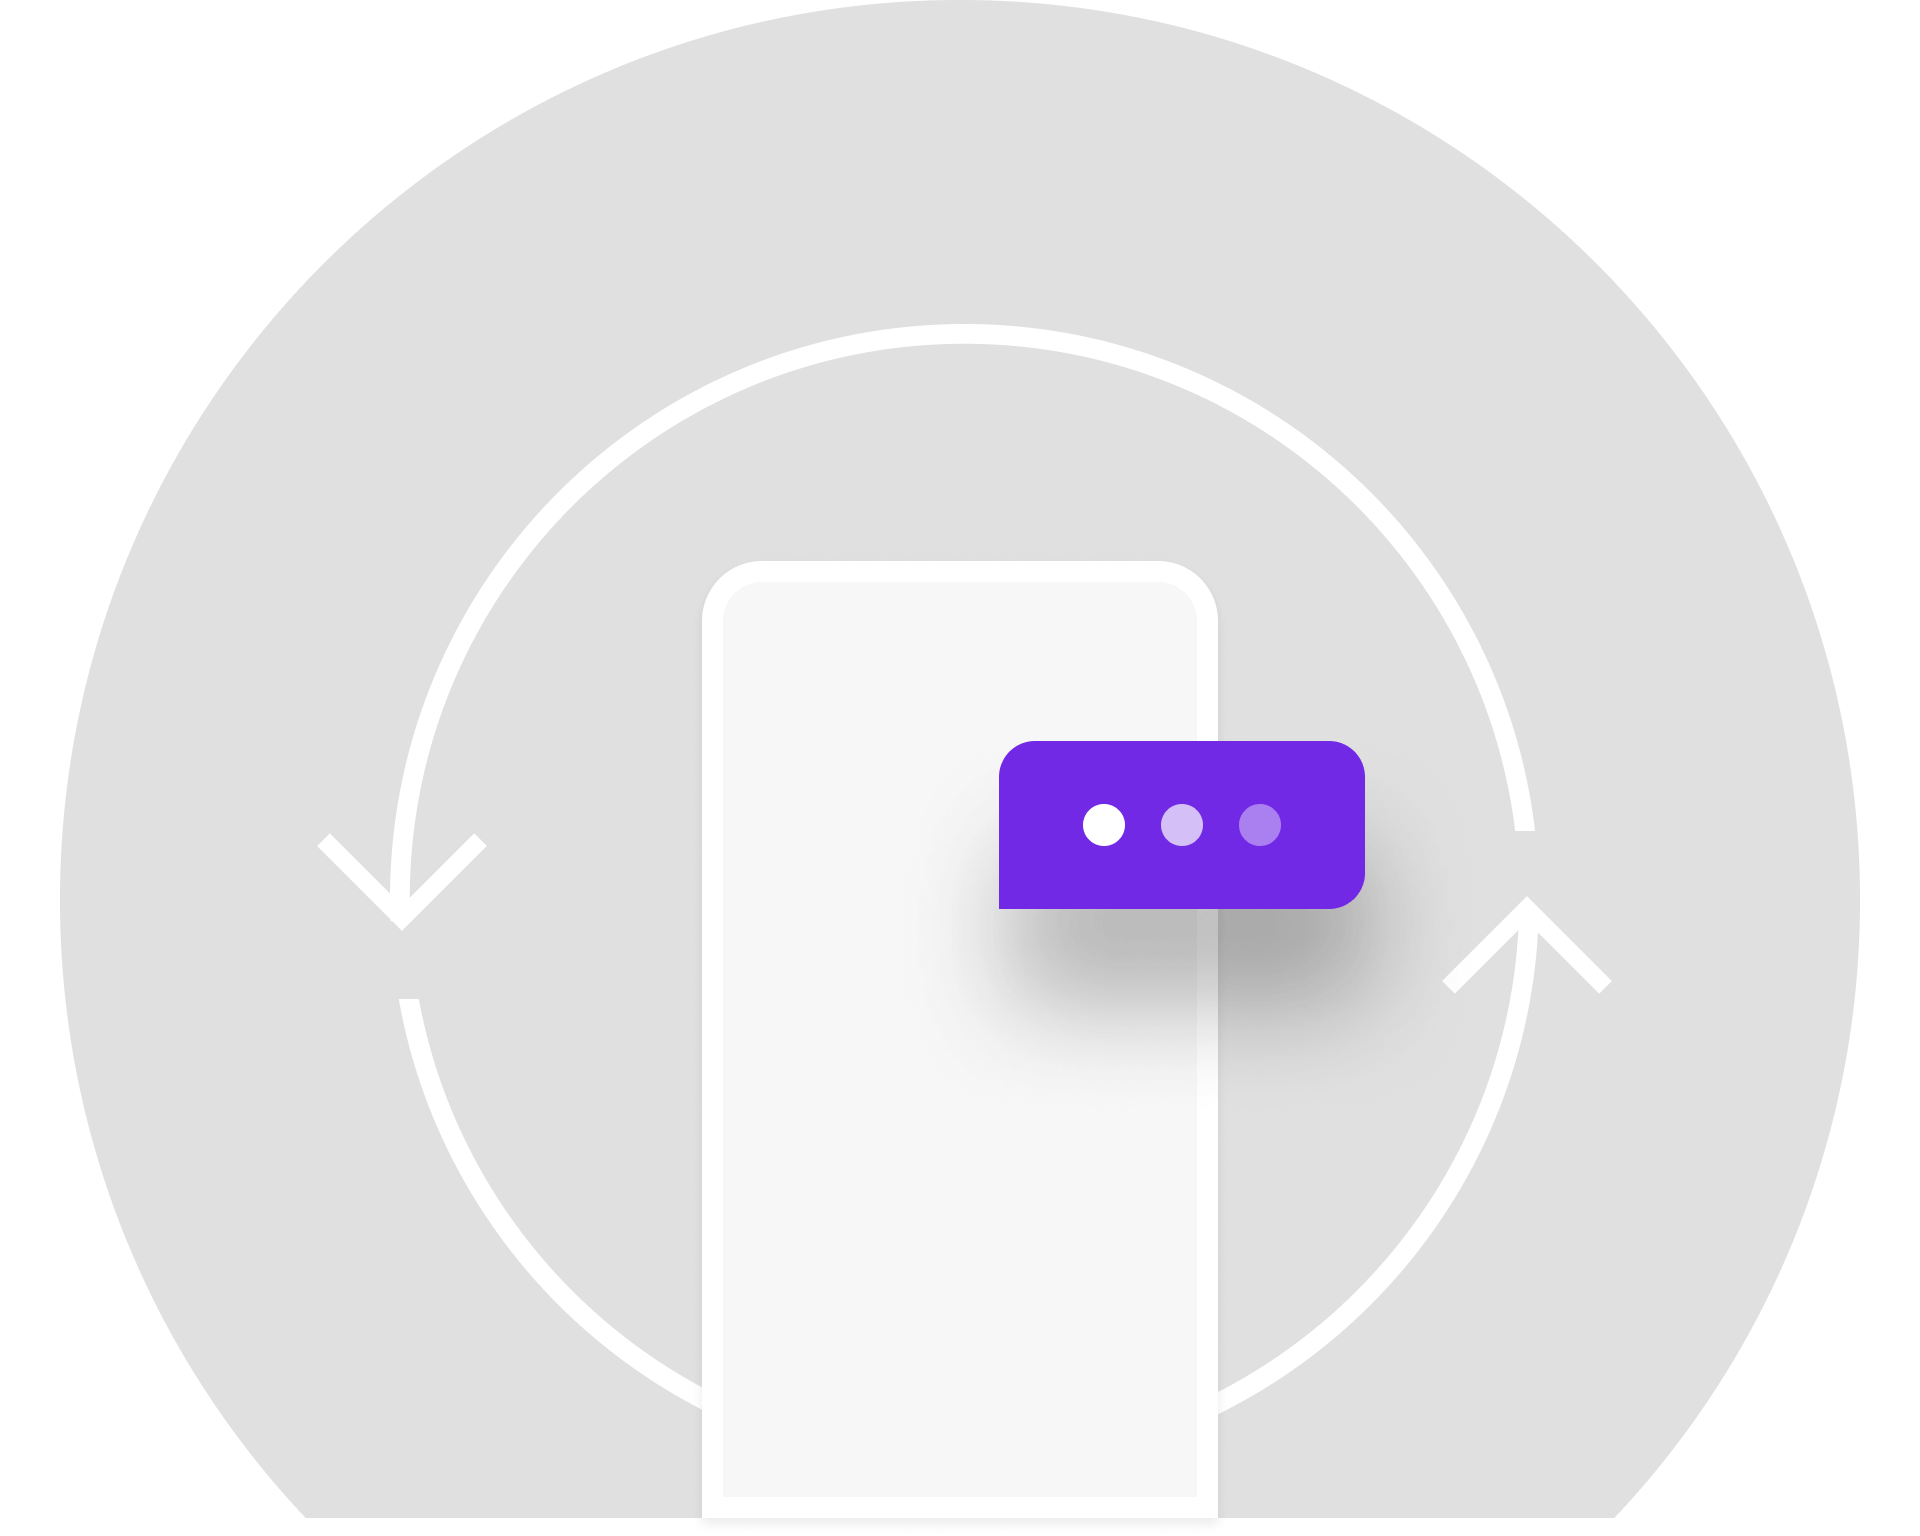 Caching messages in a client app.